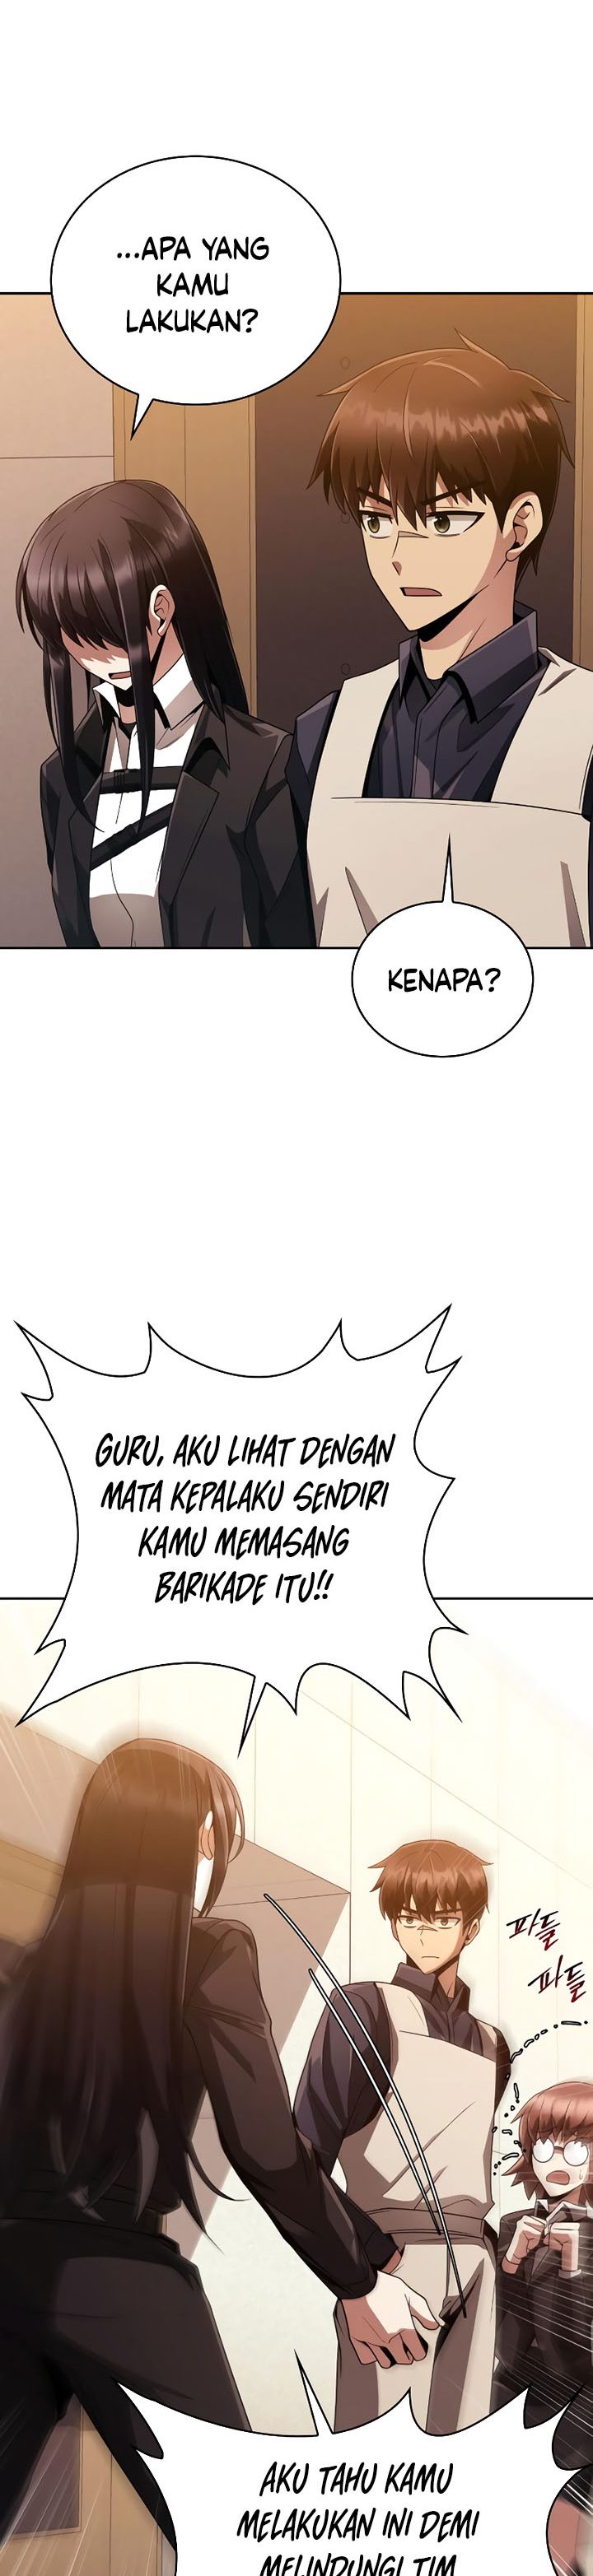 Dilarang COPAS - situs resmi www.mangacanblog.com - Komik clever cleaning life of the returned genius hunter 019 - chapter 19 20 Indonesia clever cleaning life of the returned genius hunter 019 - chapter 19 Terbaru 38|Baca Manga Komik Indonesia|Mangacan